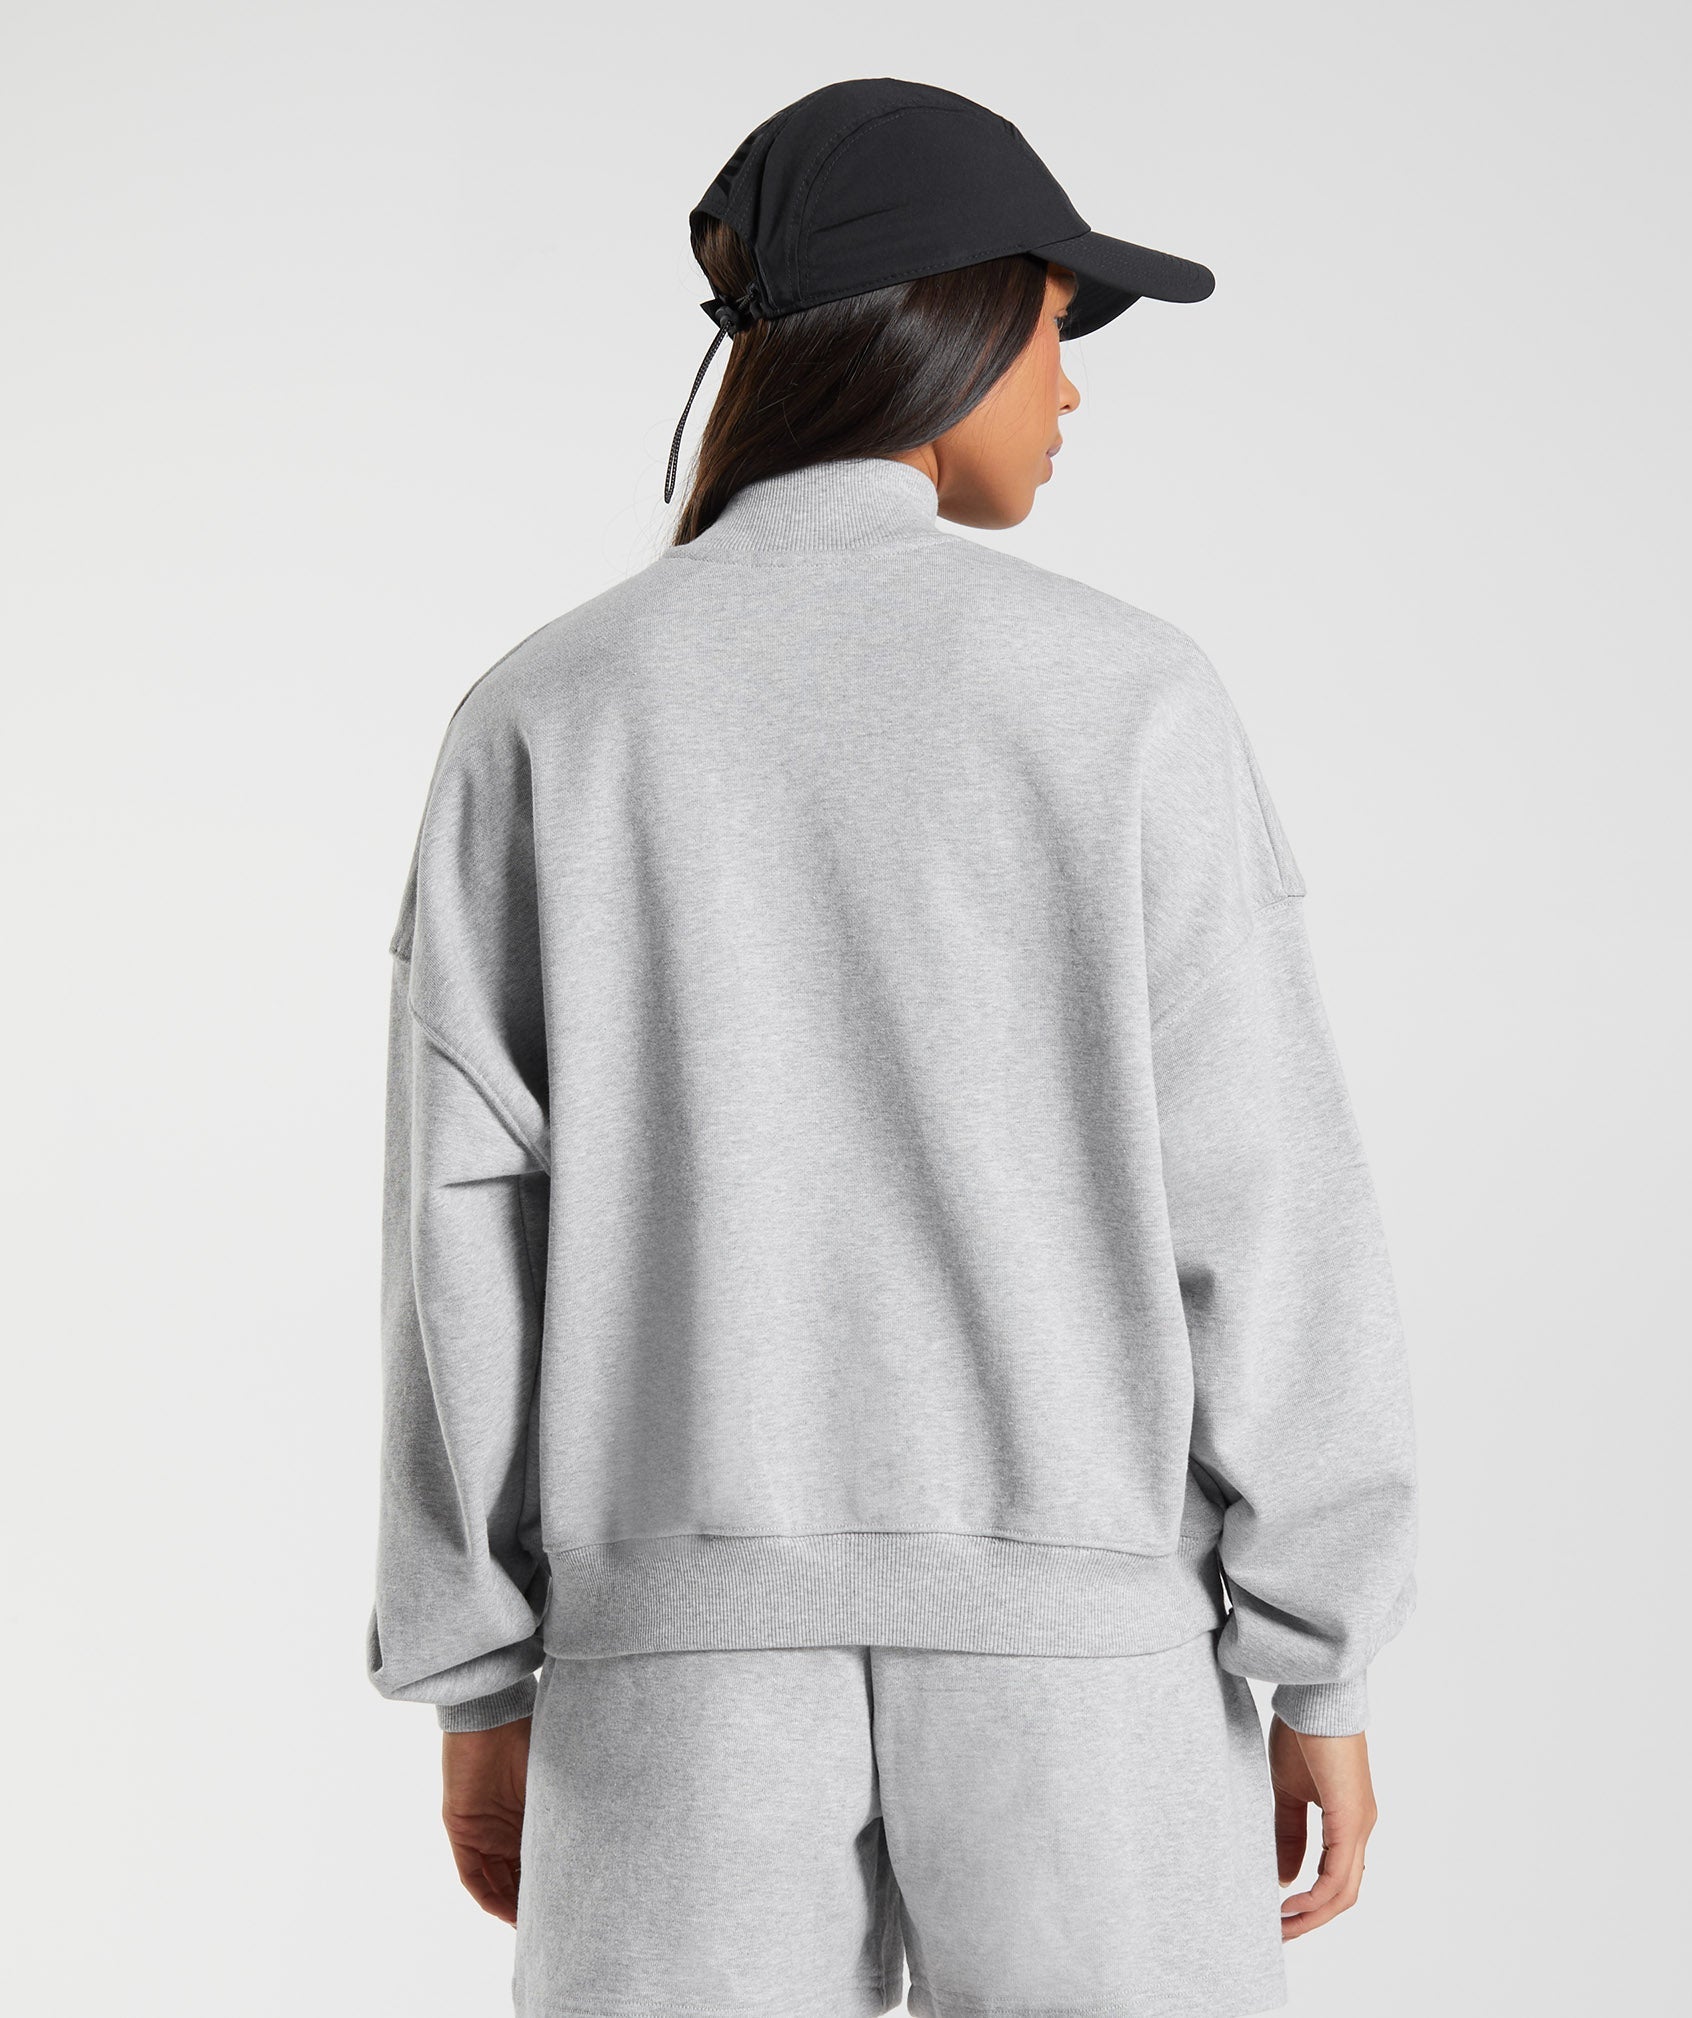 Rest Day Sweats 1/2 Zip Pullover in Light Grey Core Marl